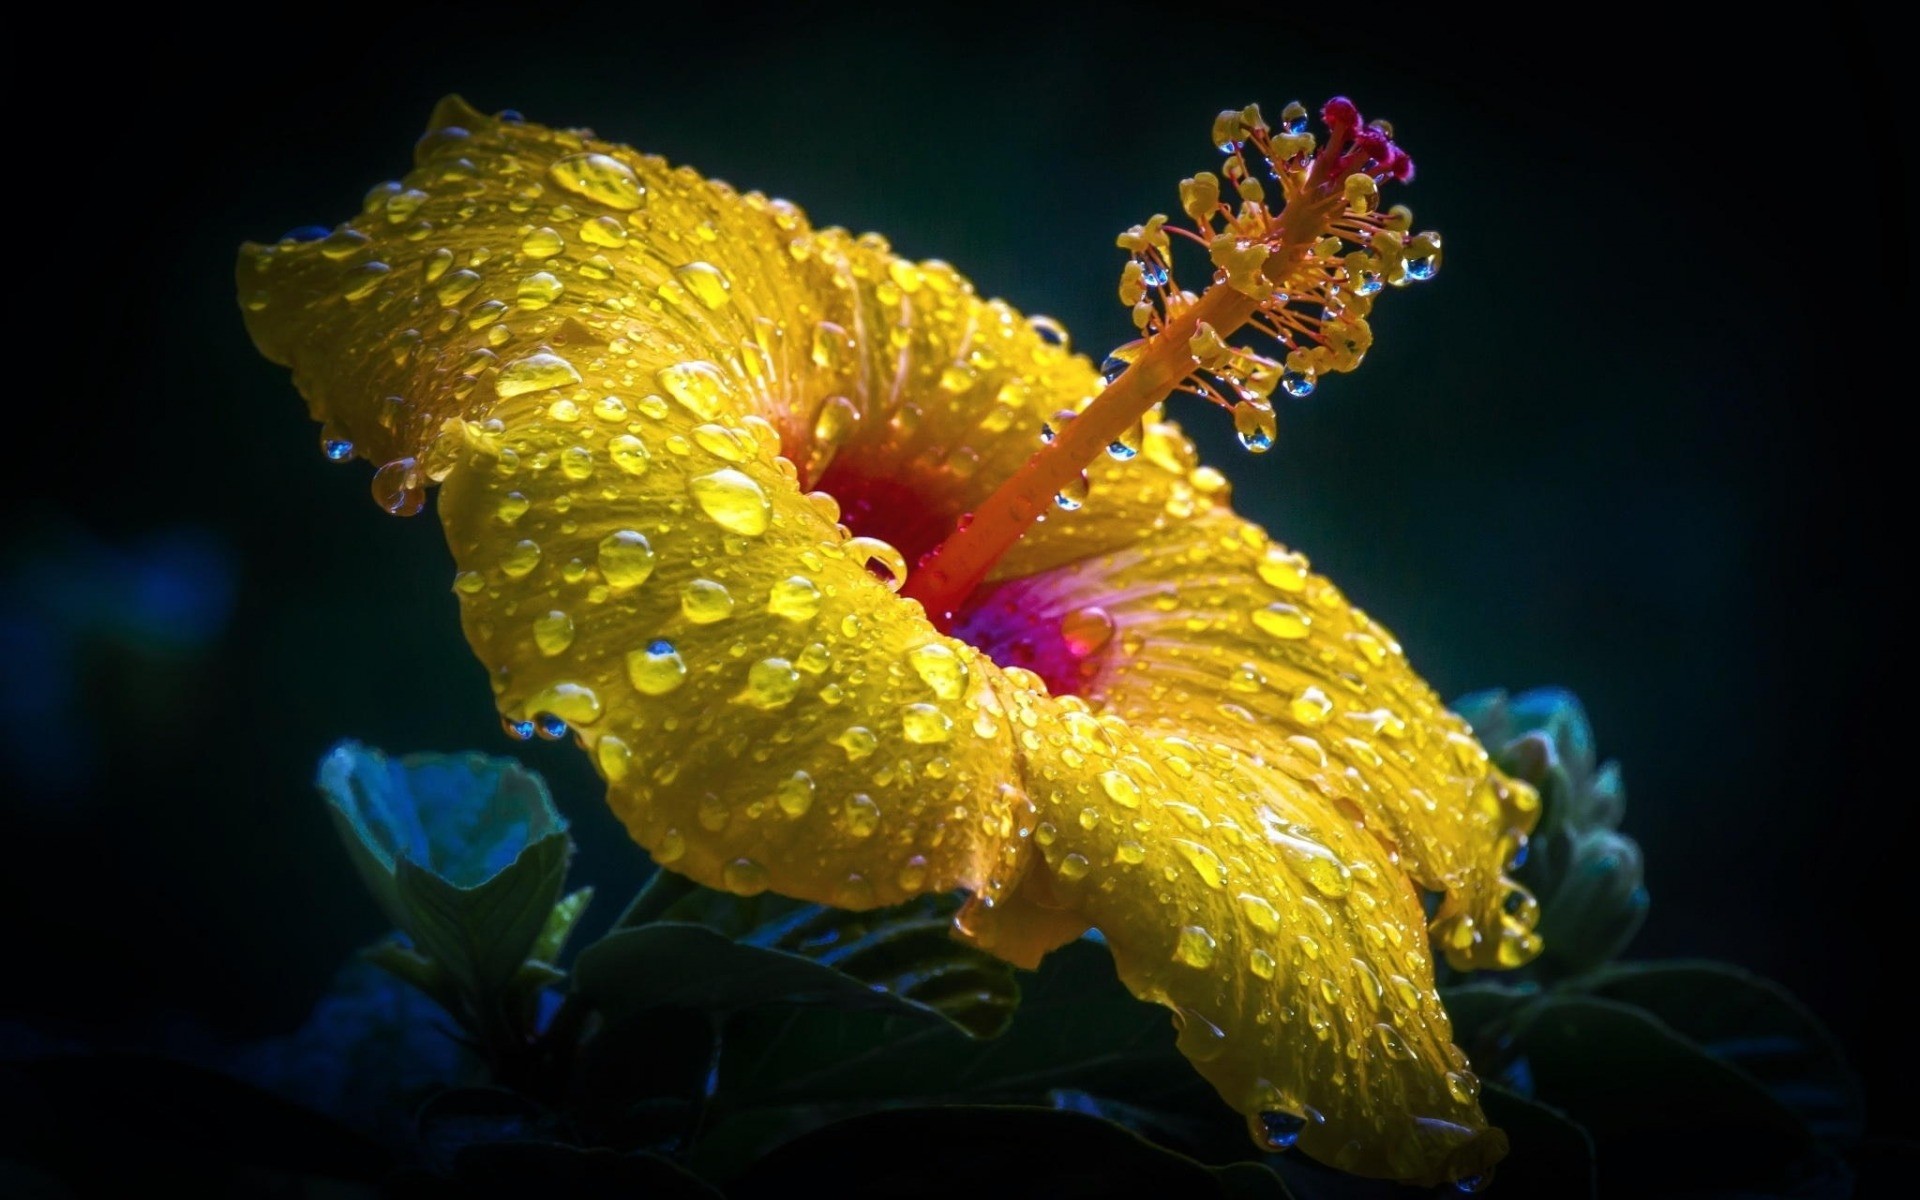 hibiscus, flowers, earth, close up, flower, water drop, yellow flower